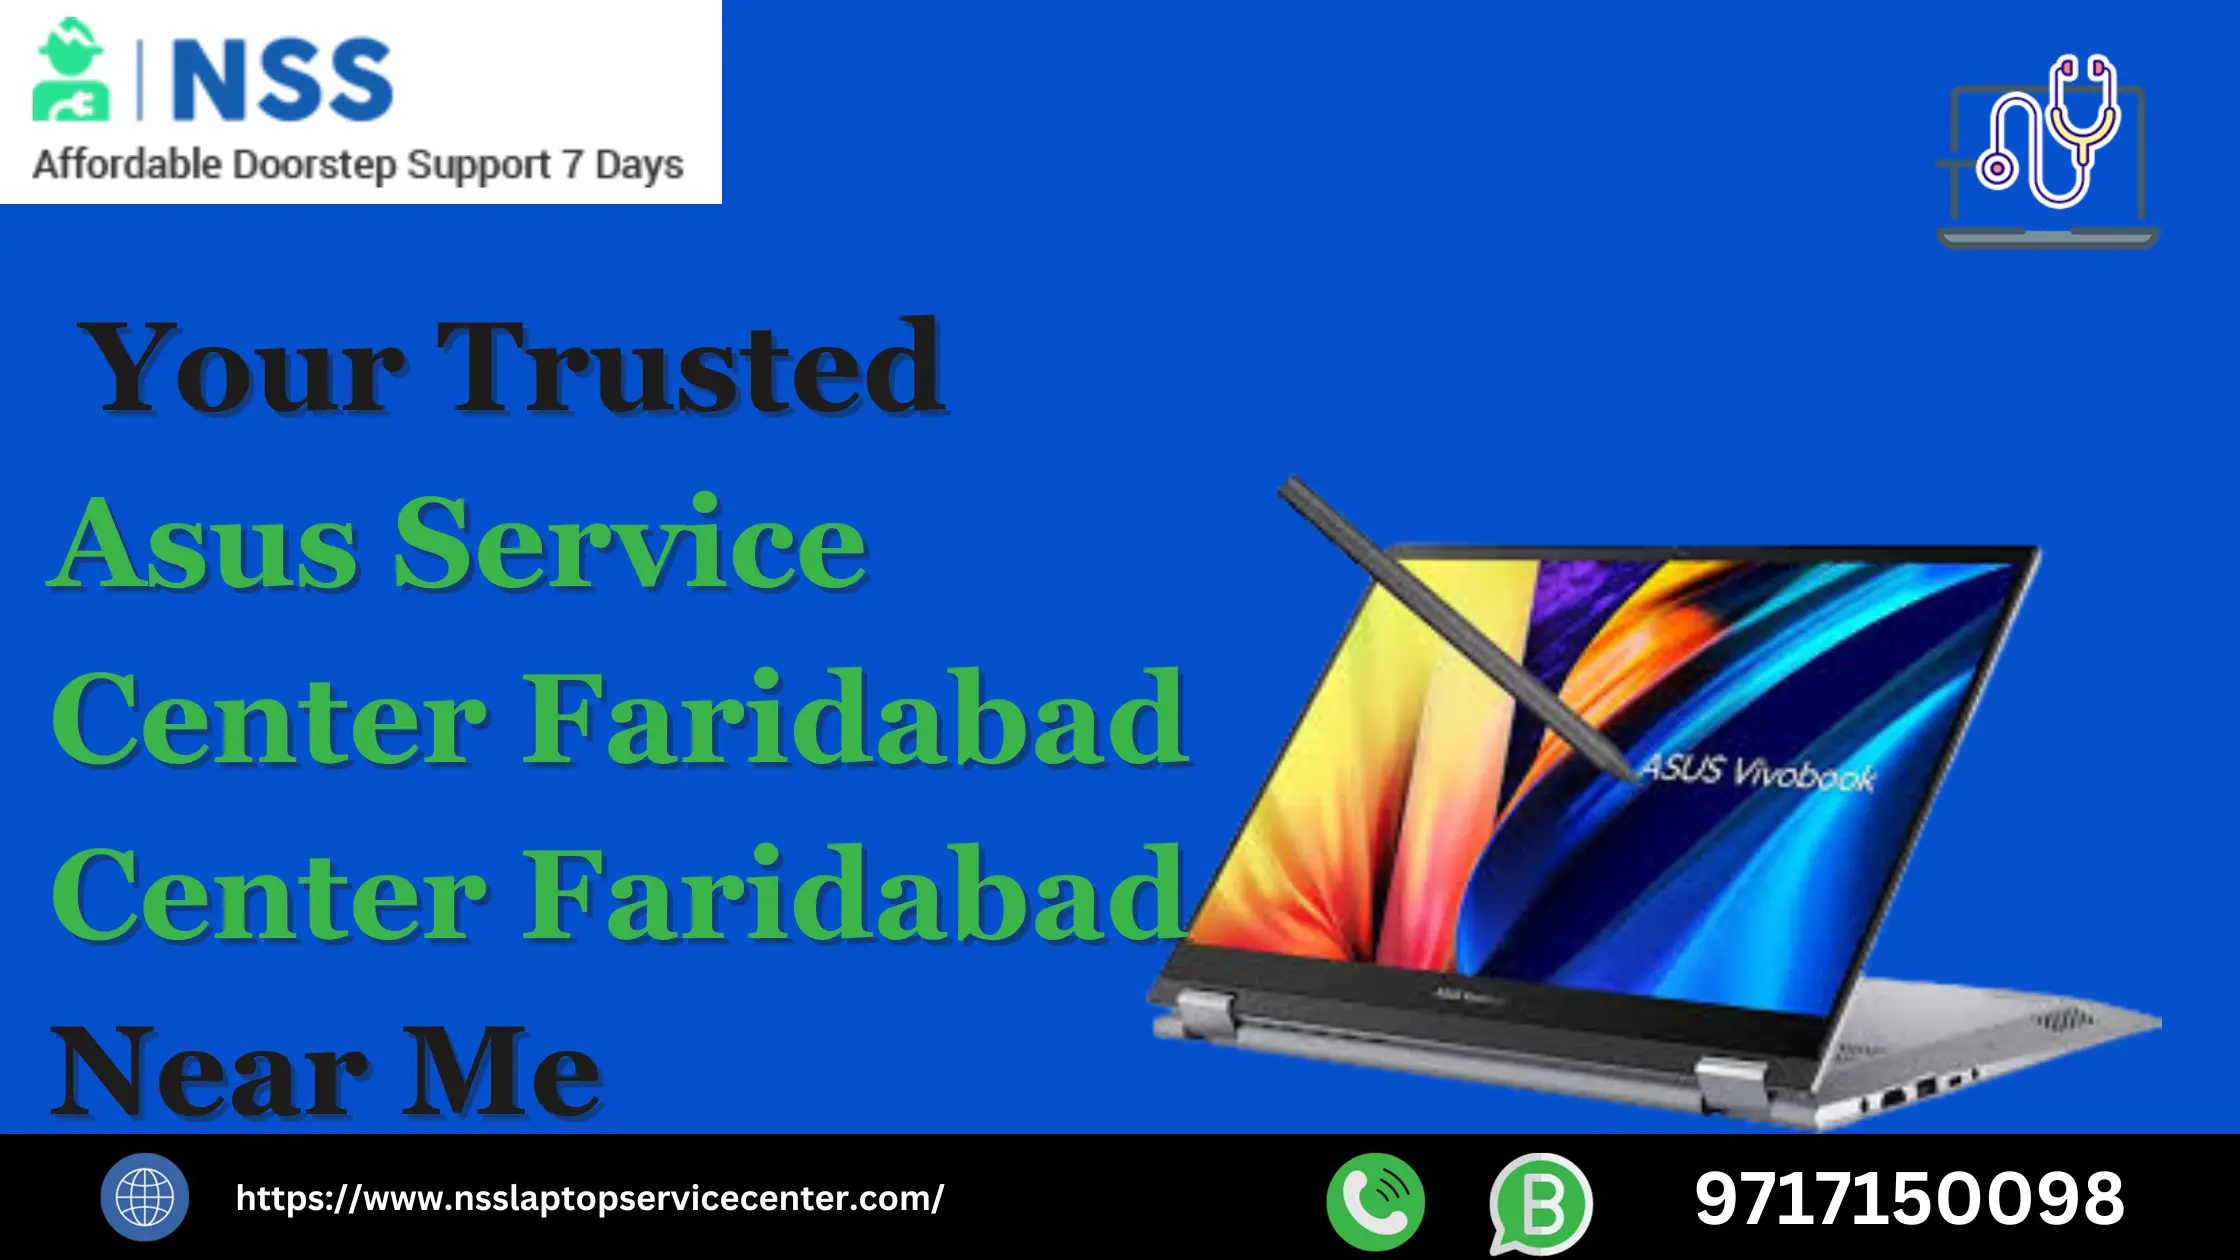 Your Trusted Asus Service Center Faridabad Near Me